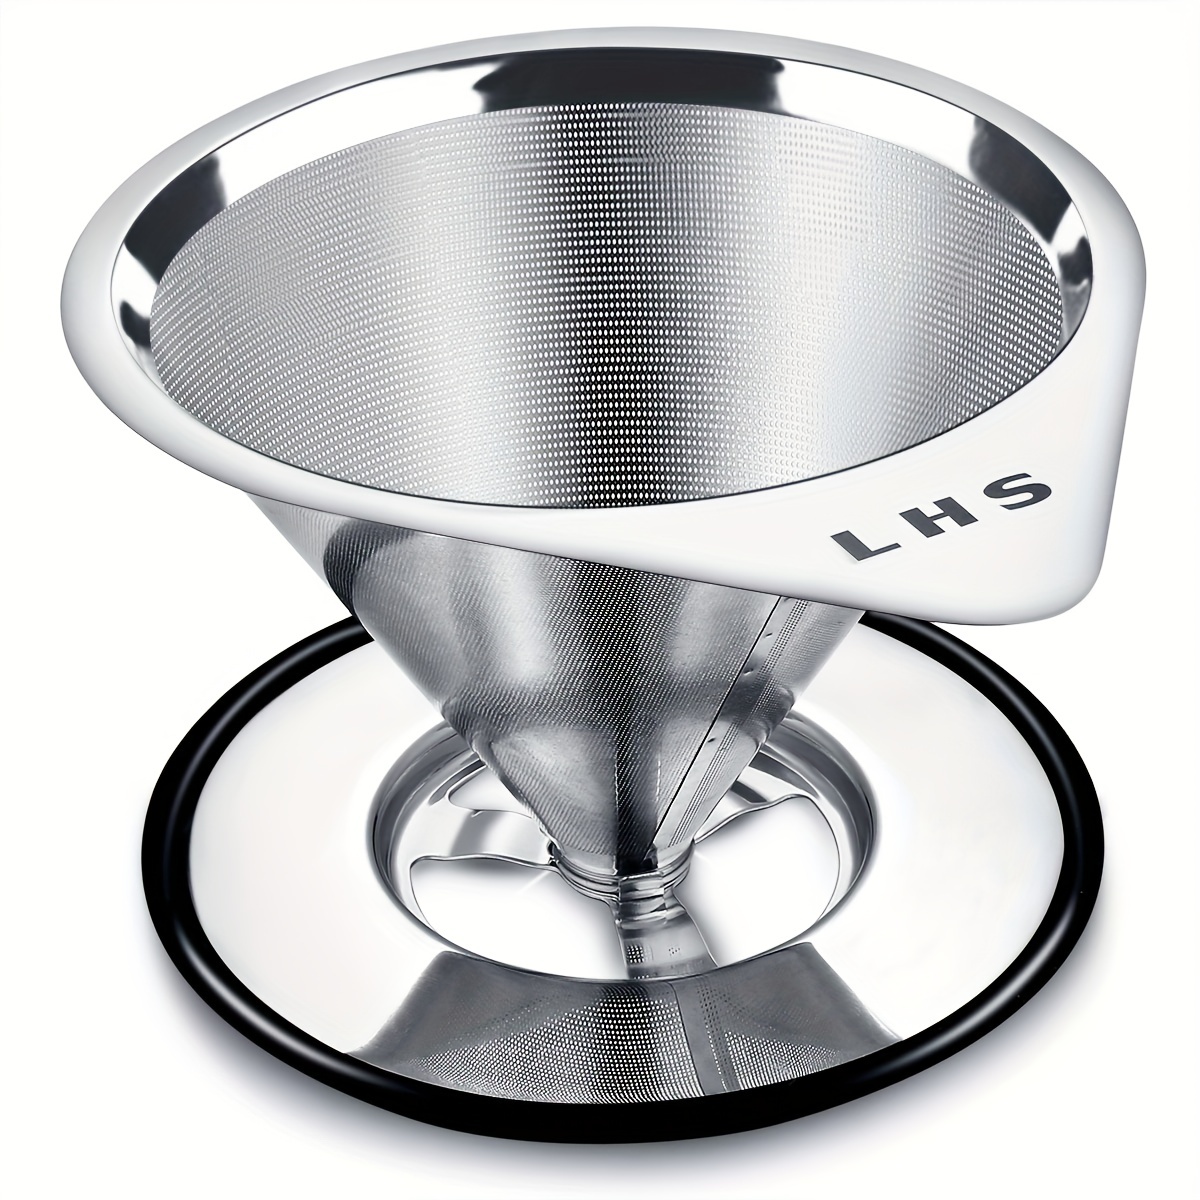 4 Cup High Quality Stainless Steel Pour Over Coffee Maker, Stand, Two Layer  Cone